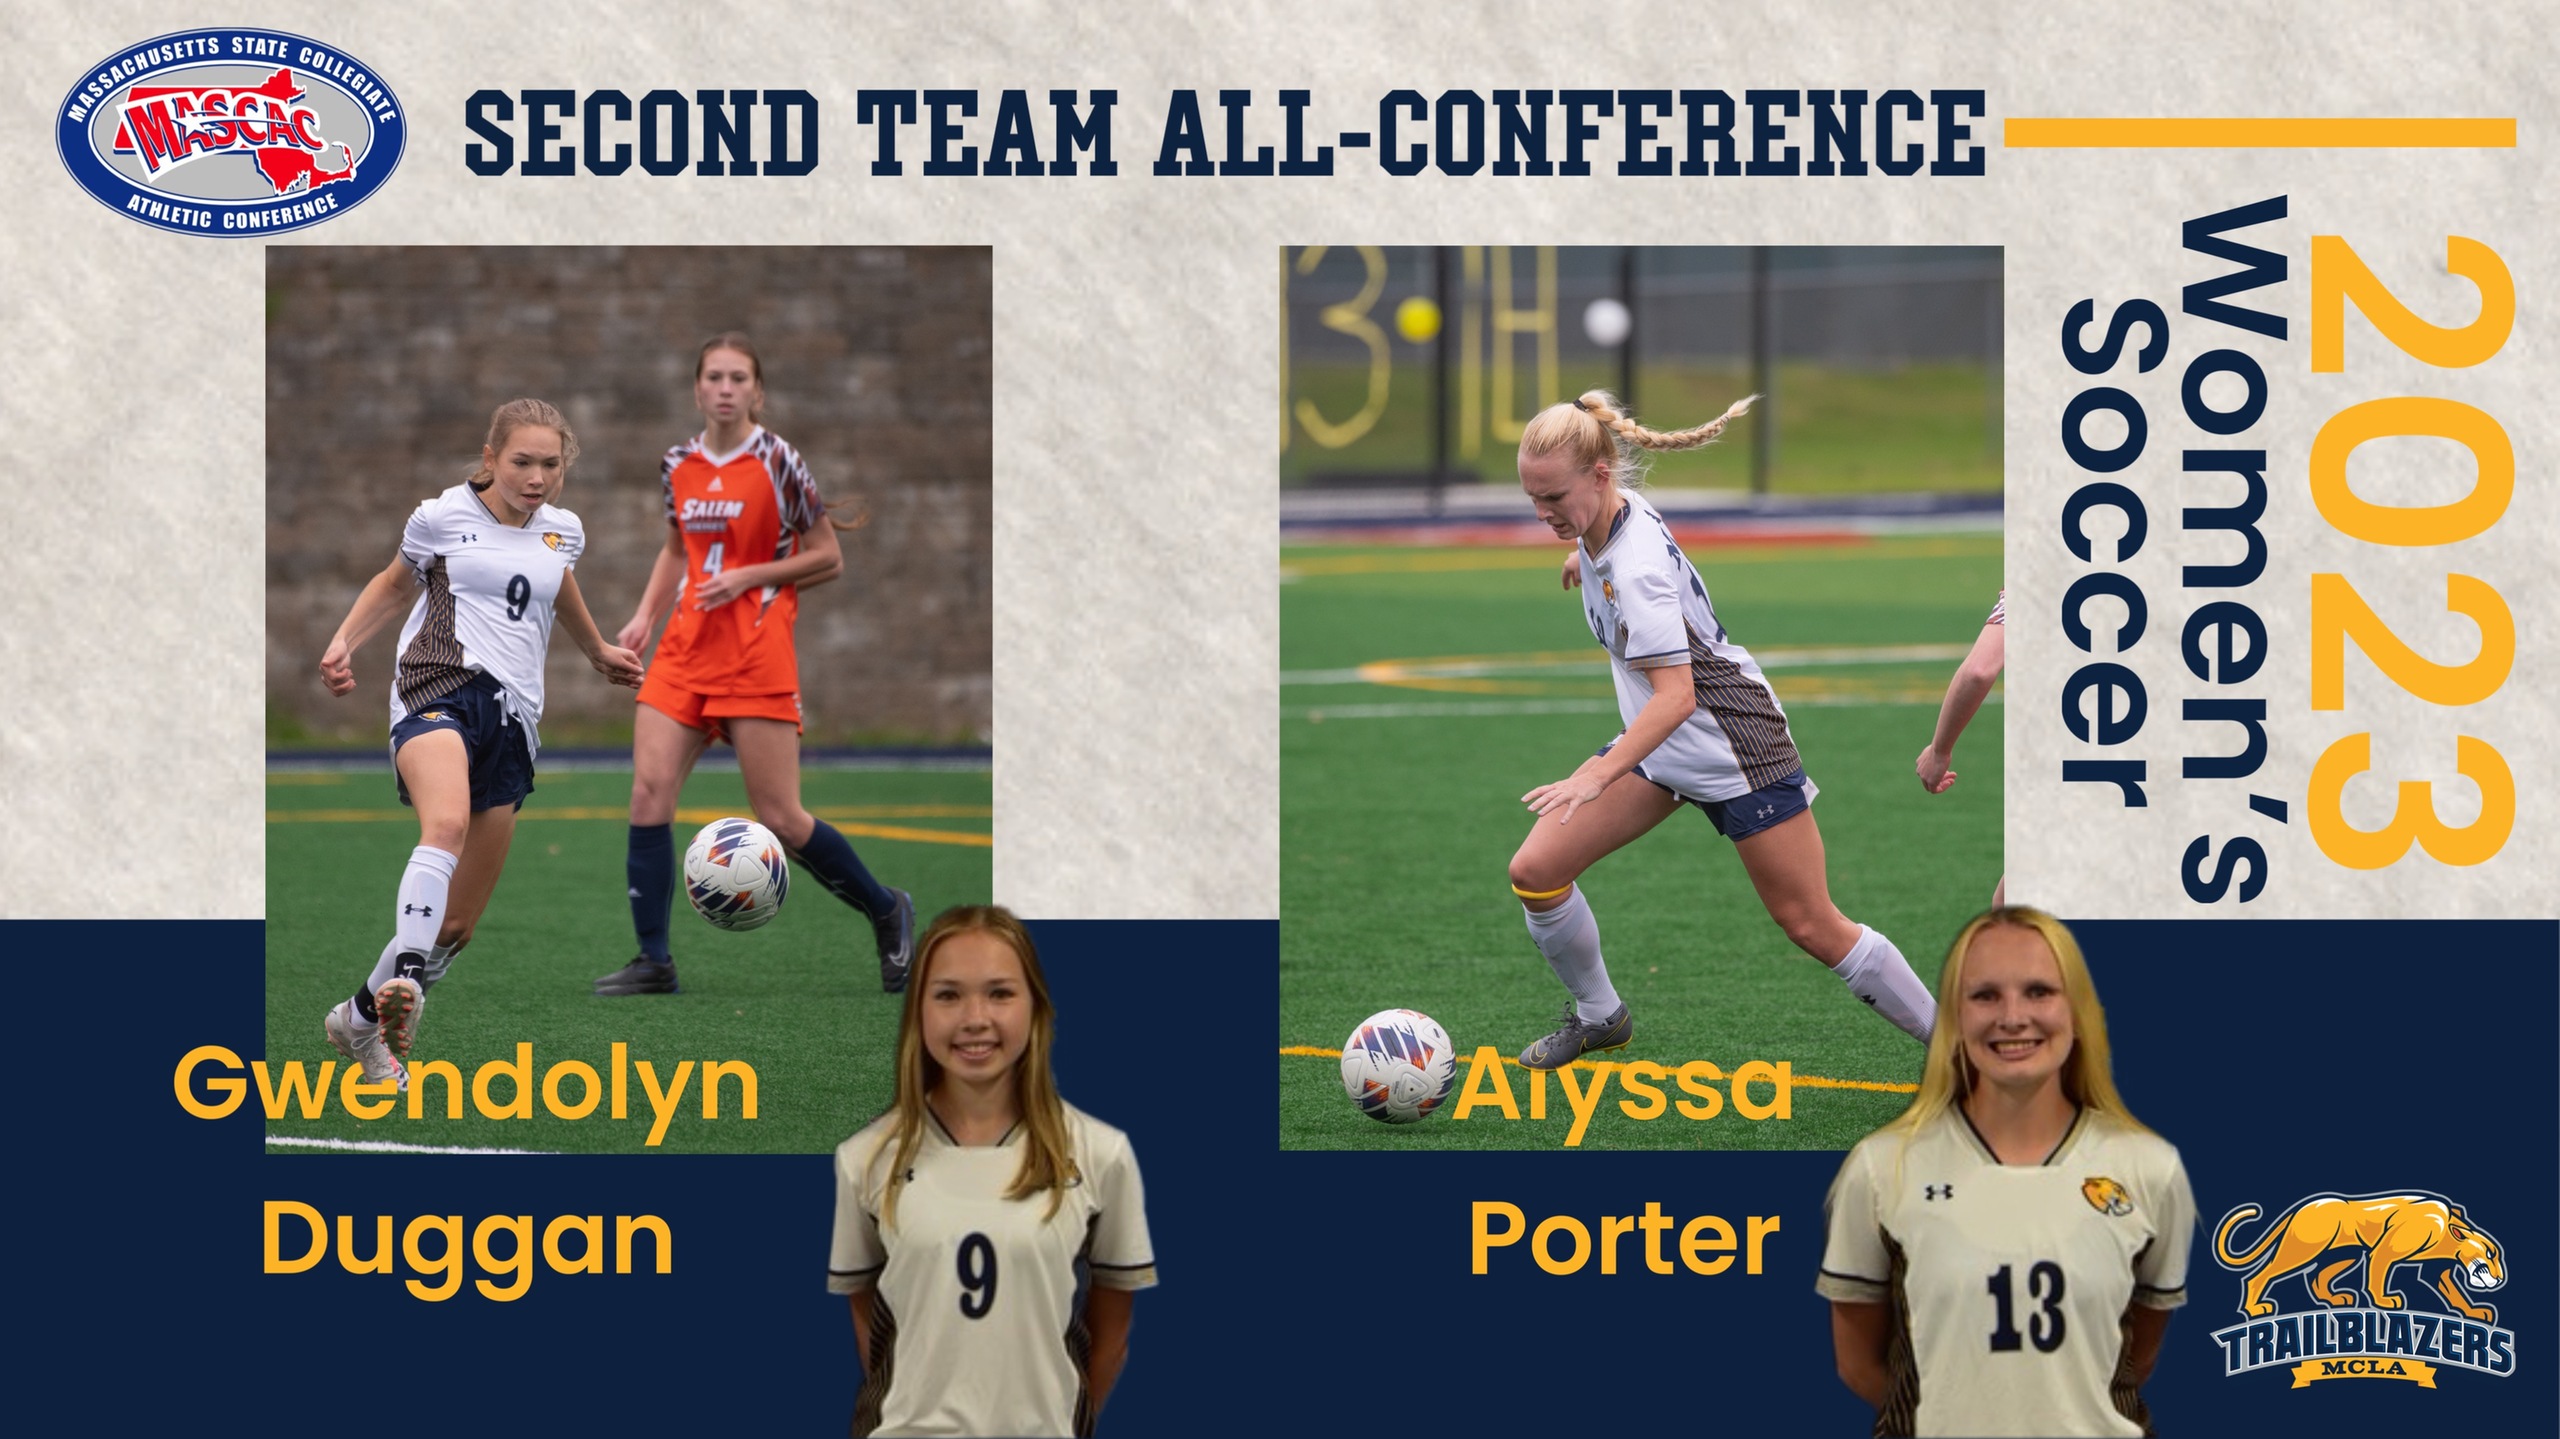 MCLA's Duggan and Porter were named to MASCAC All-Conference second team